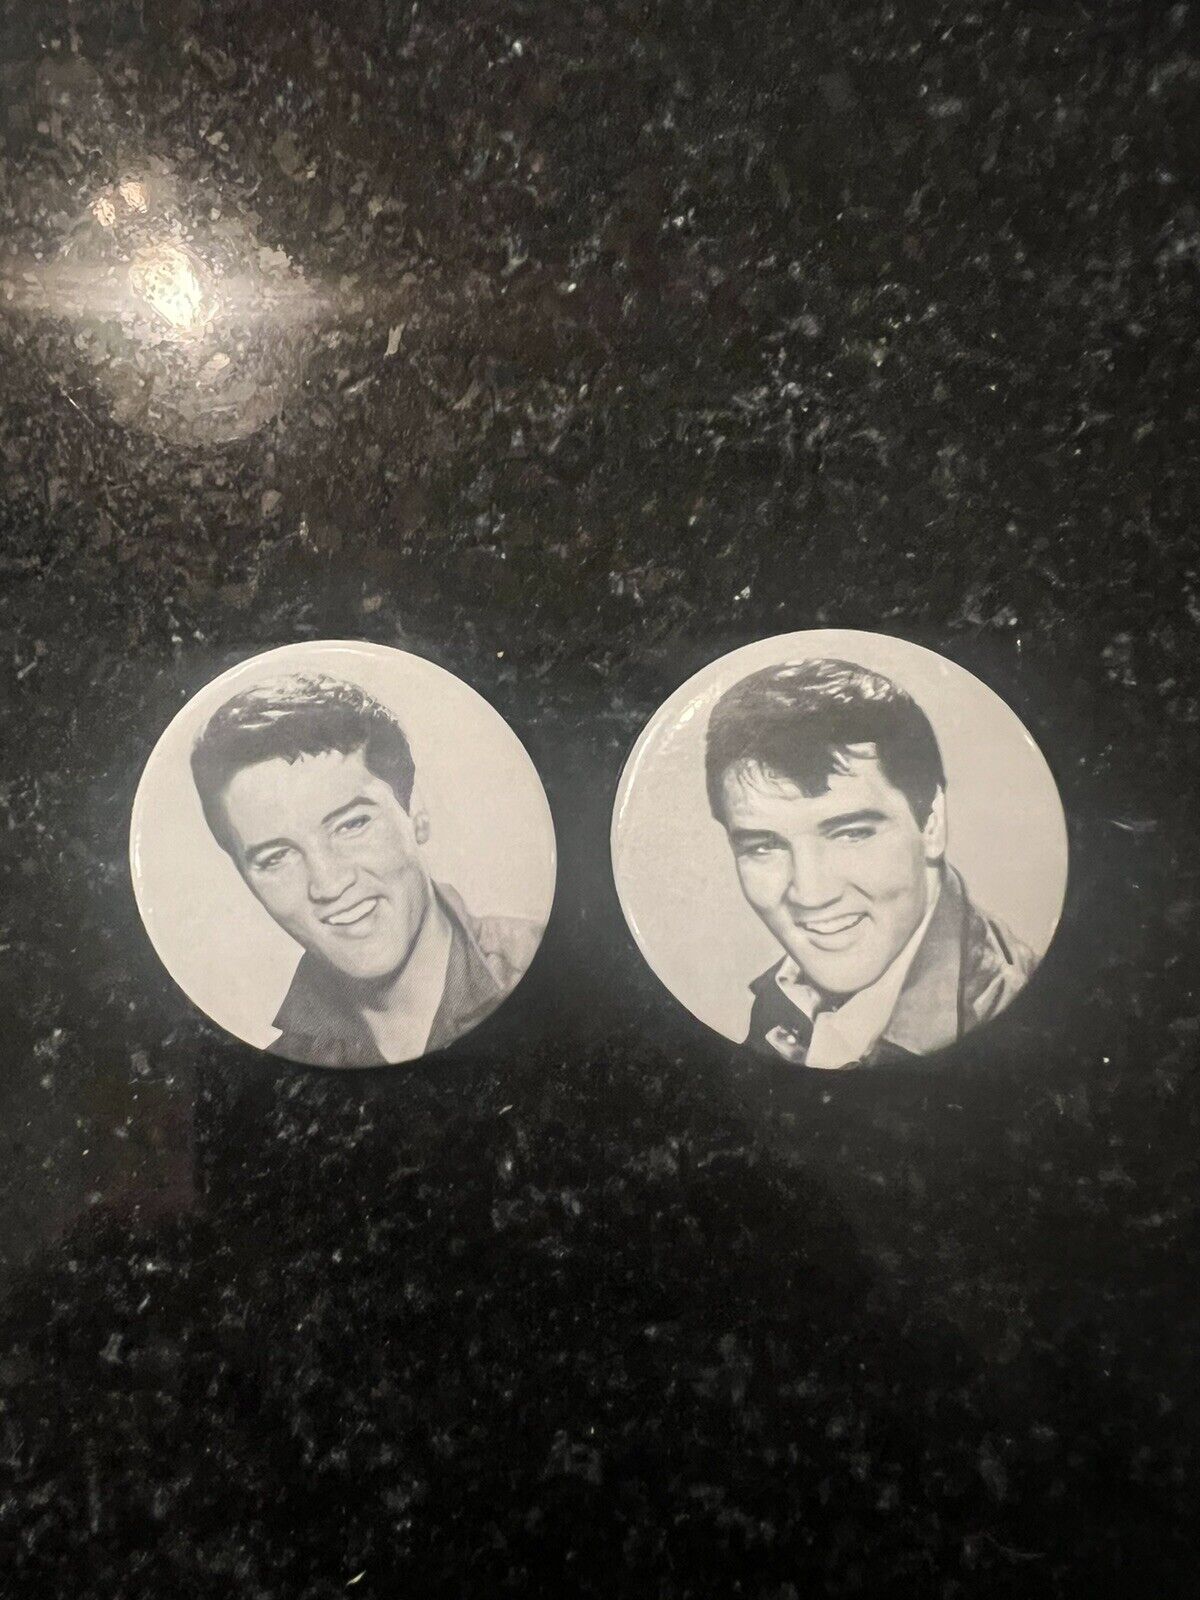 ELVIS PRESLEY VINTAGE 1985 PIN PINBACK BUTTONS 1.5”  Black and White.